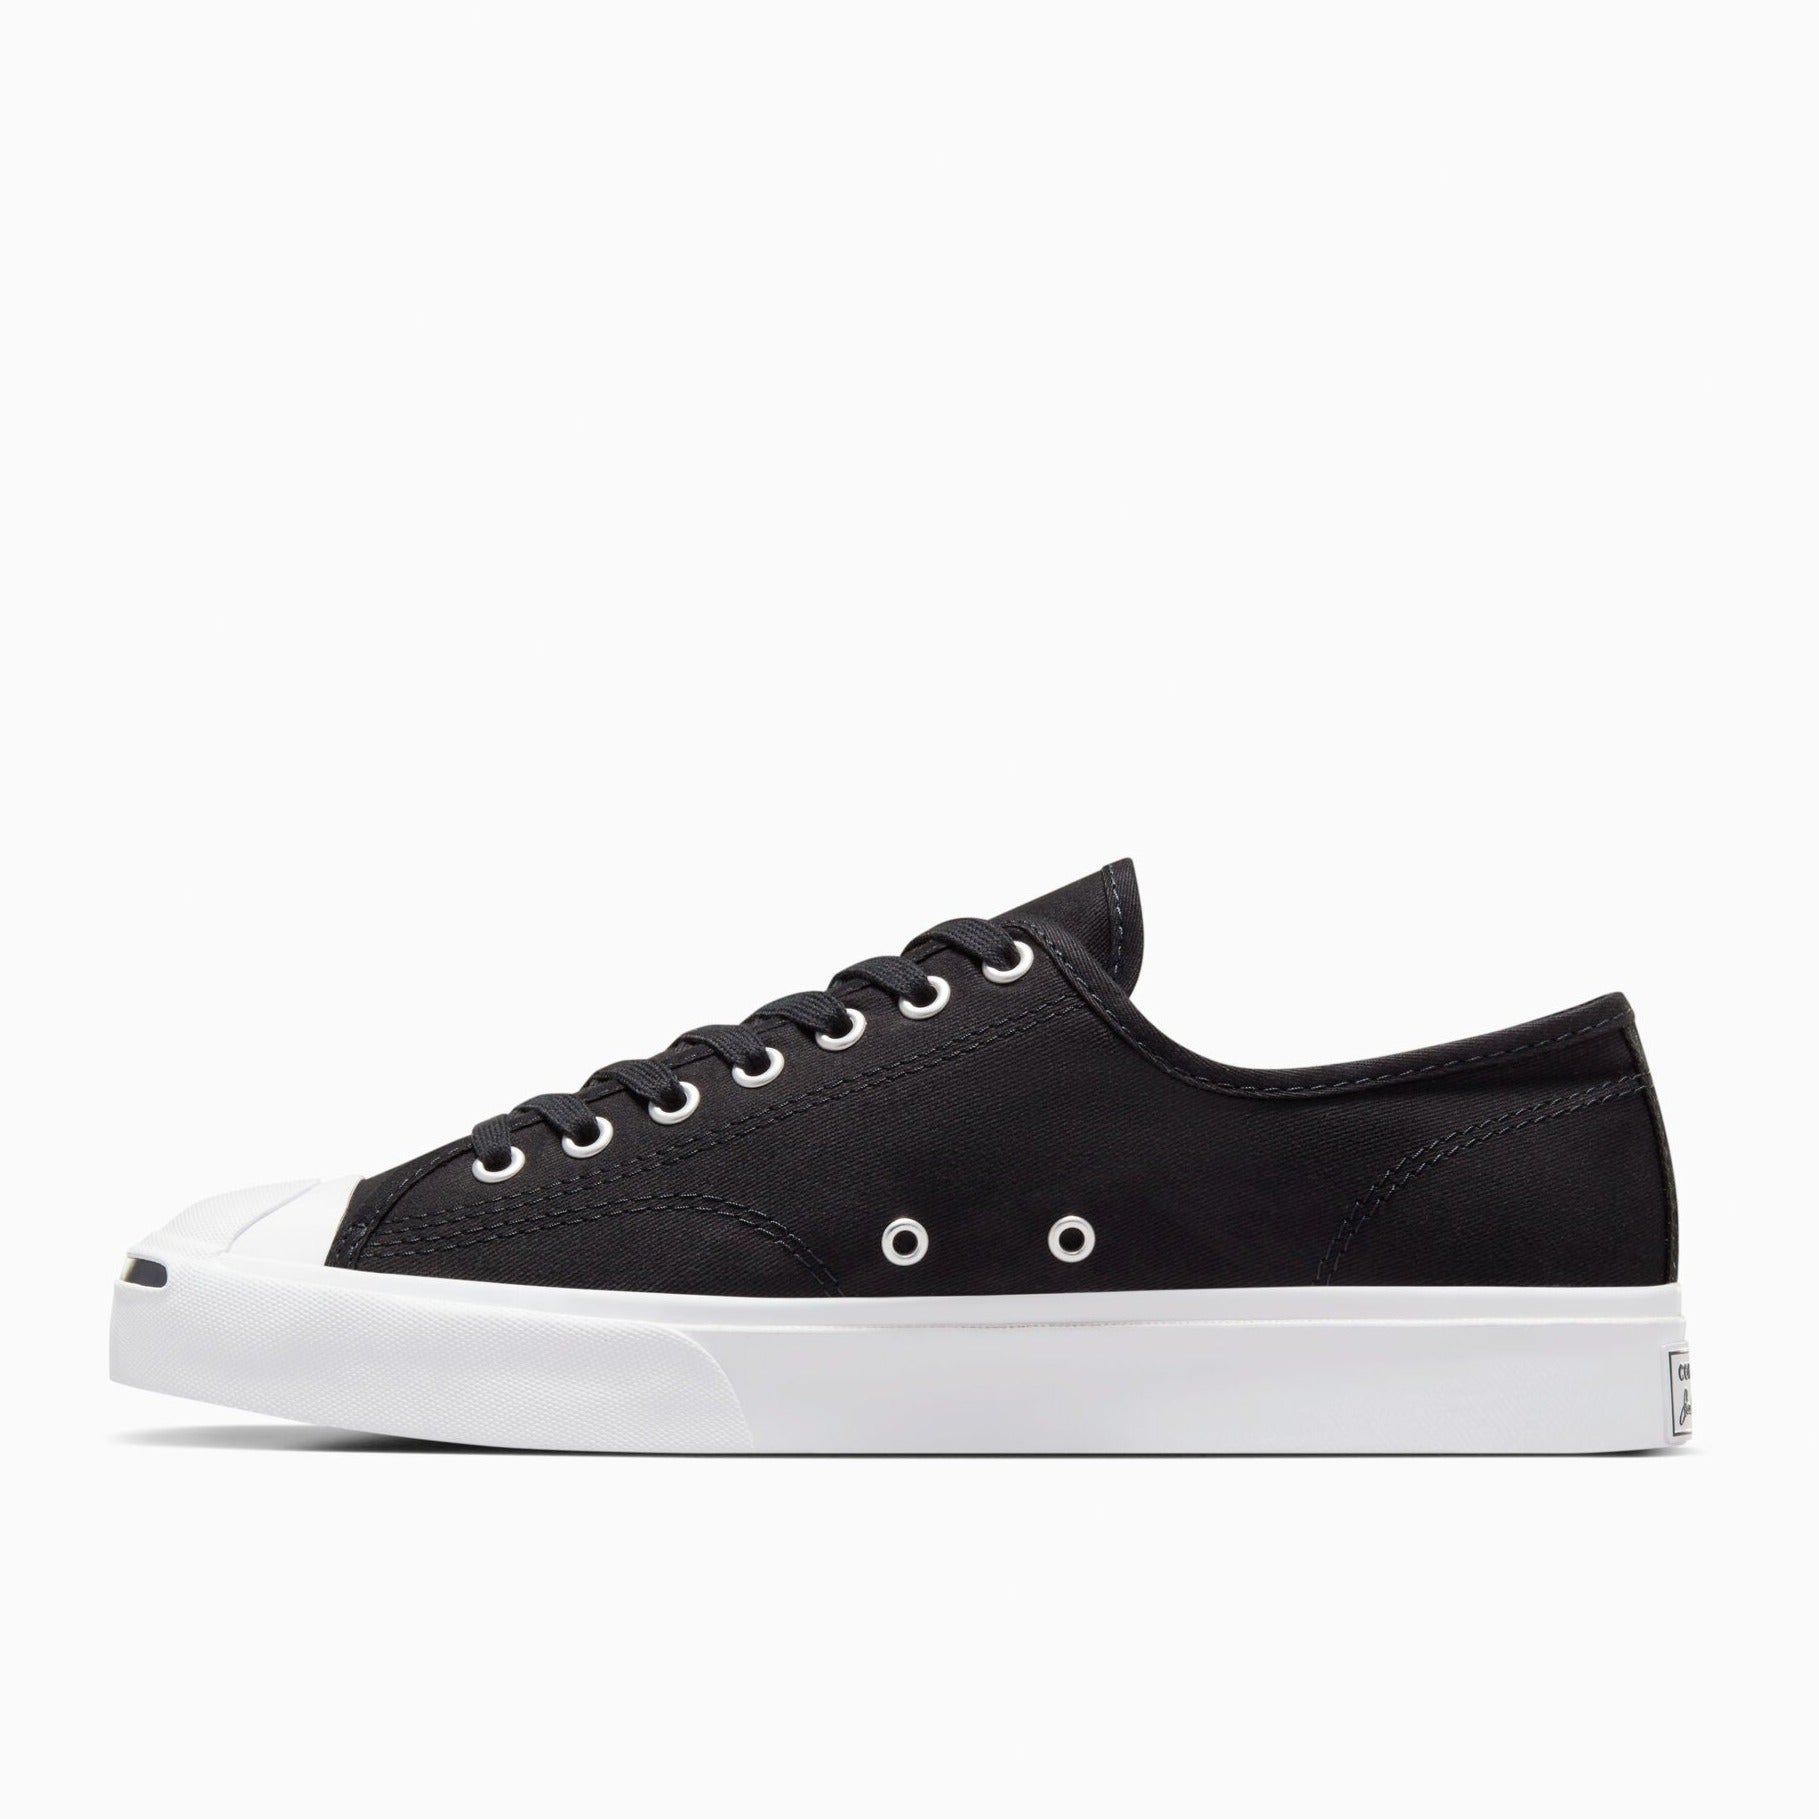 Converse Jack Purcell Canvas Low Black